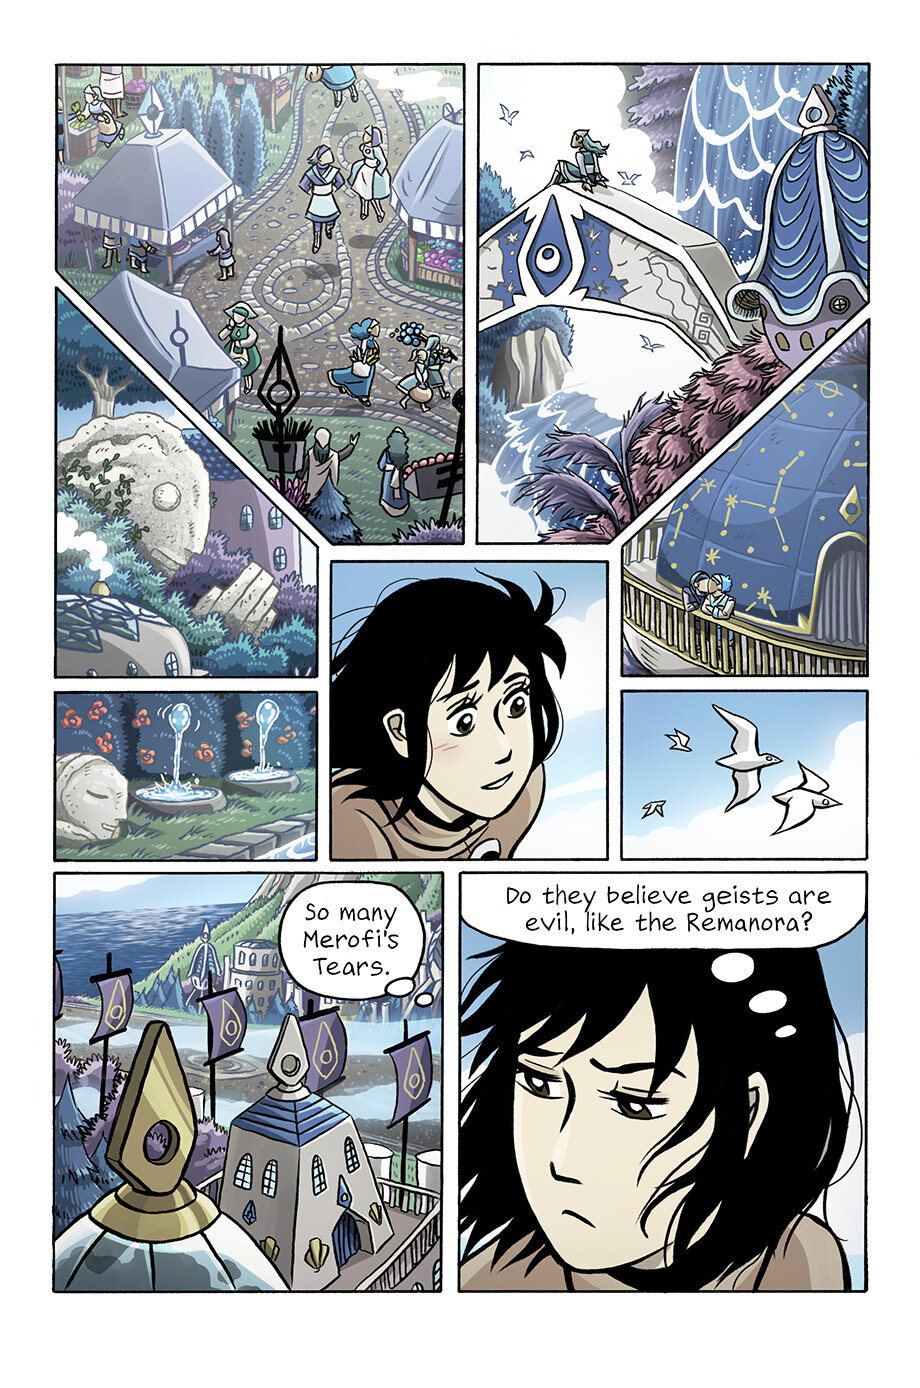 Realm of the Blue Mist The Rema Chronicles #1 A Graphic Novel